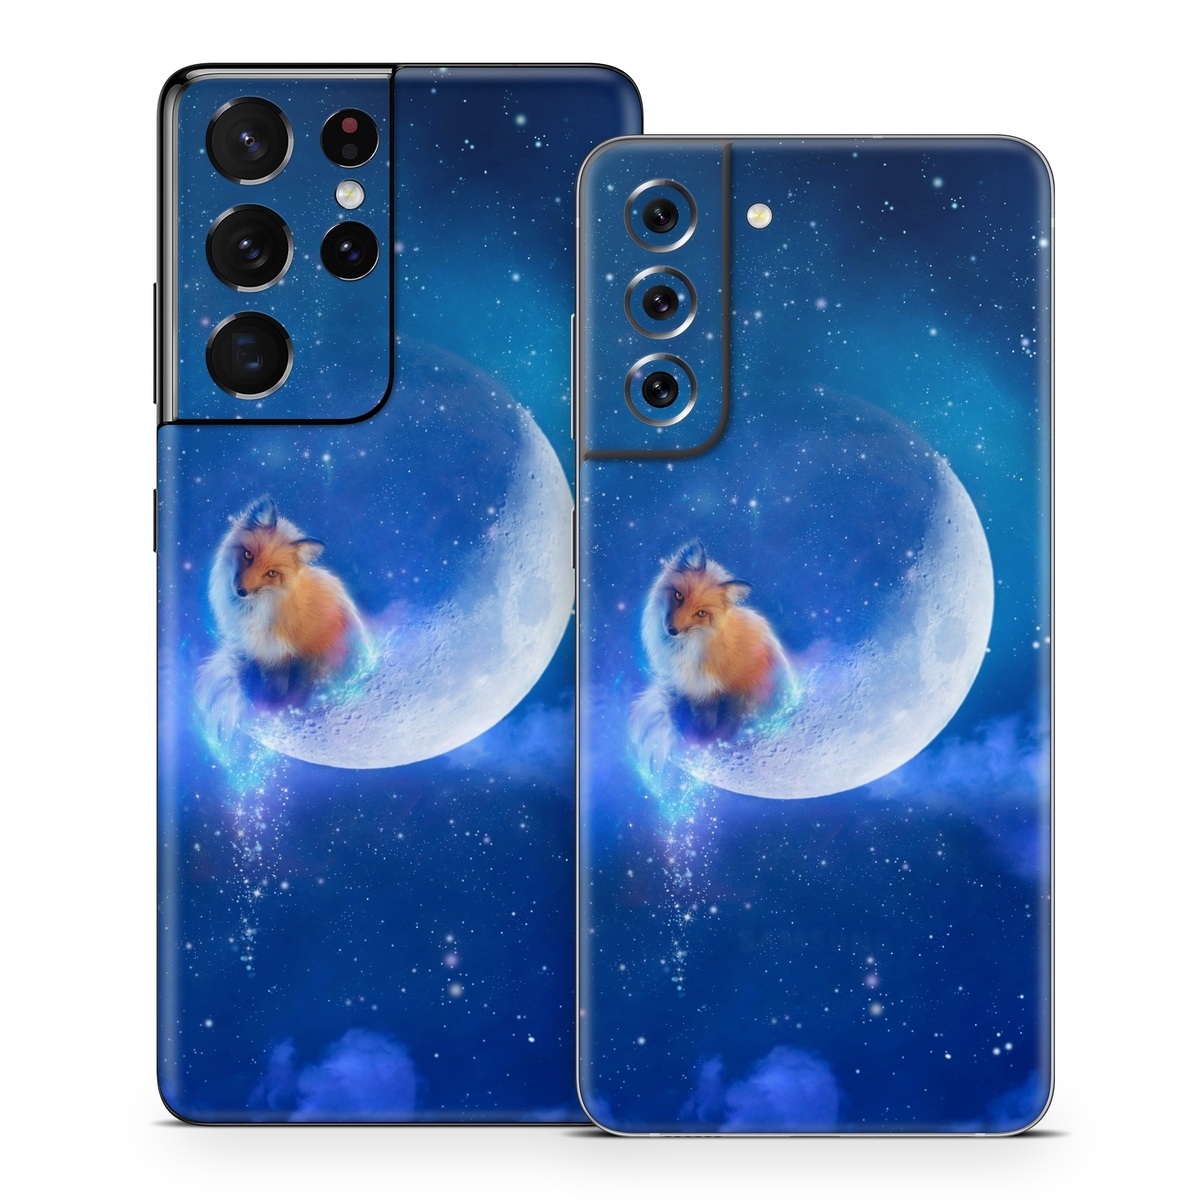 Samsung Galaxy S21 Series Skin design of Sky, Atmosphere, Astronomical object, Outer space, Space, Universe, Illustration, Nebula, Galaxy, Fictional character, with blue, black, gray colors